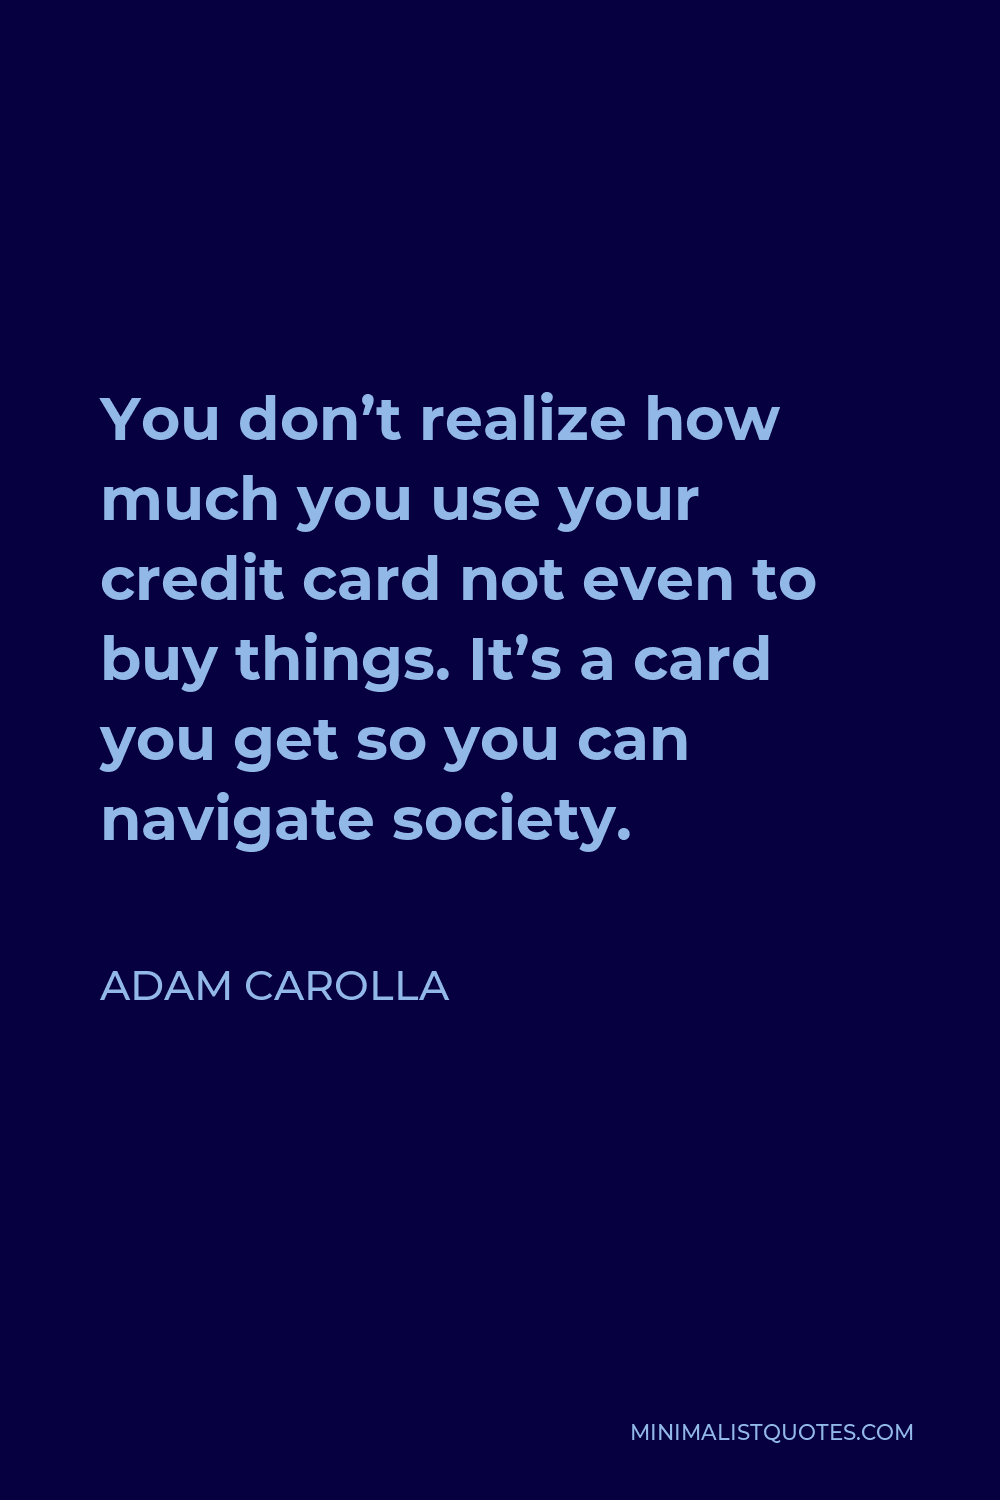 Adam Carolla Quote - You don’t realize how much you use your credit card not even to buy things. It’s a card you get so you can navigate society.